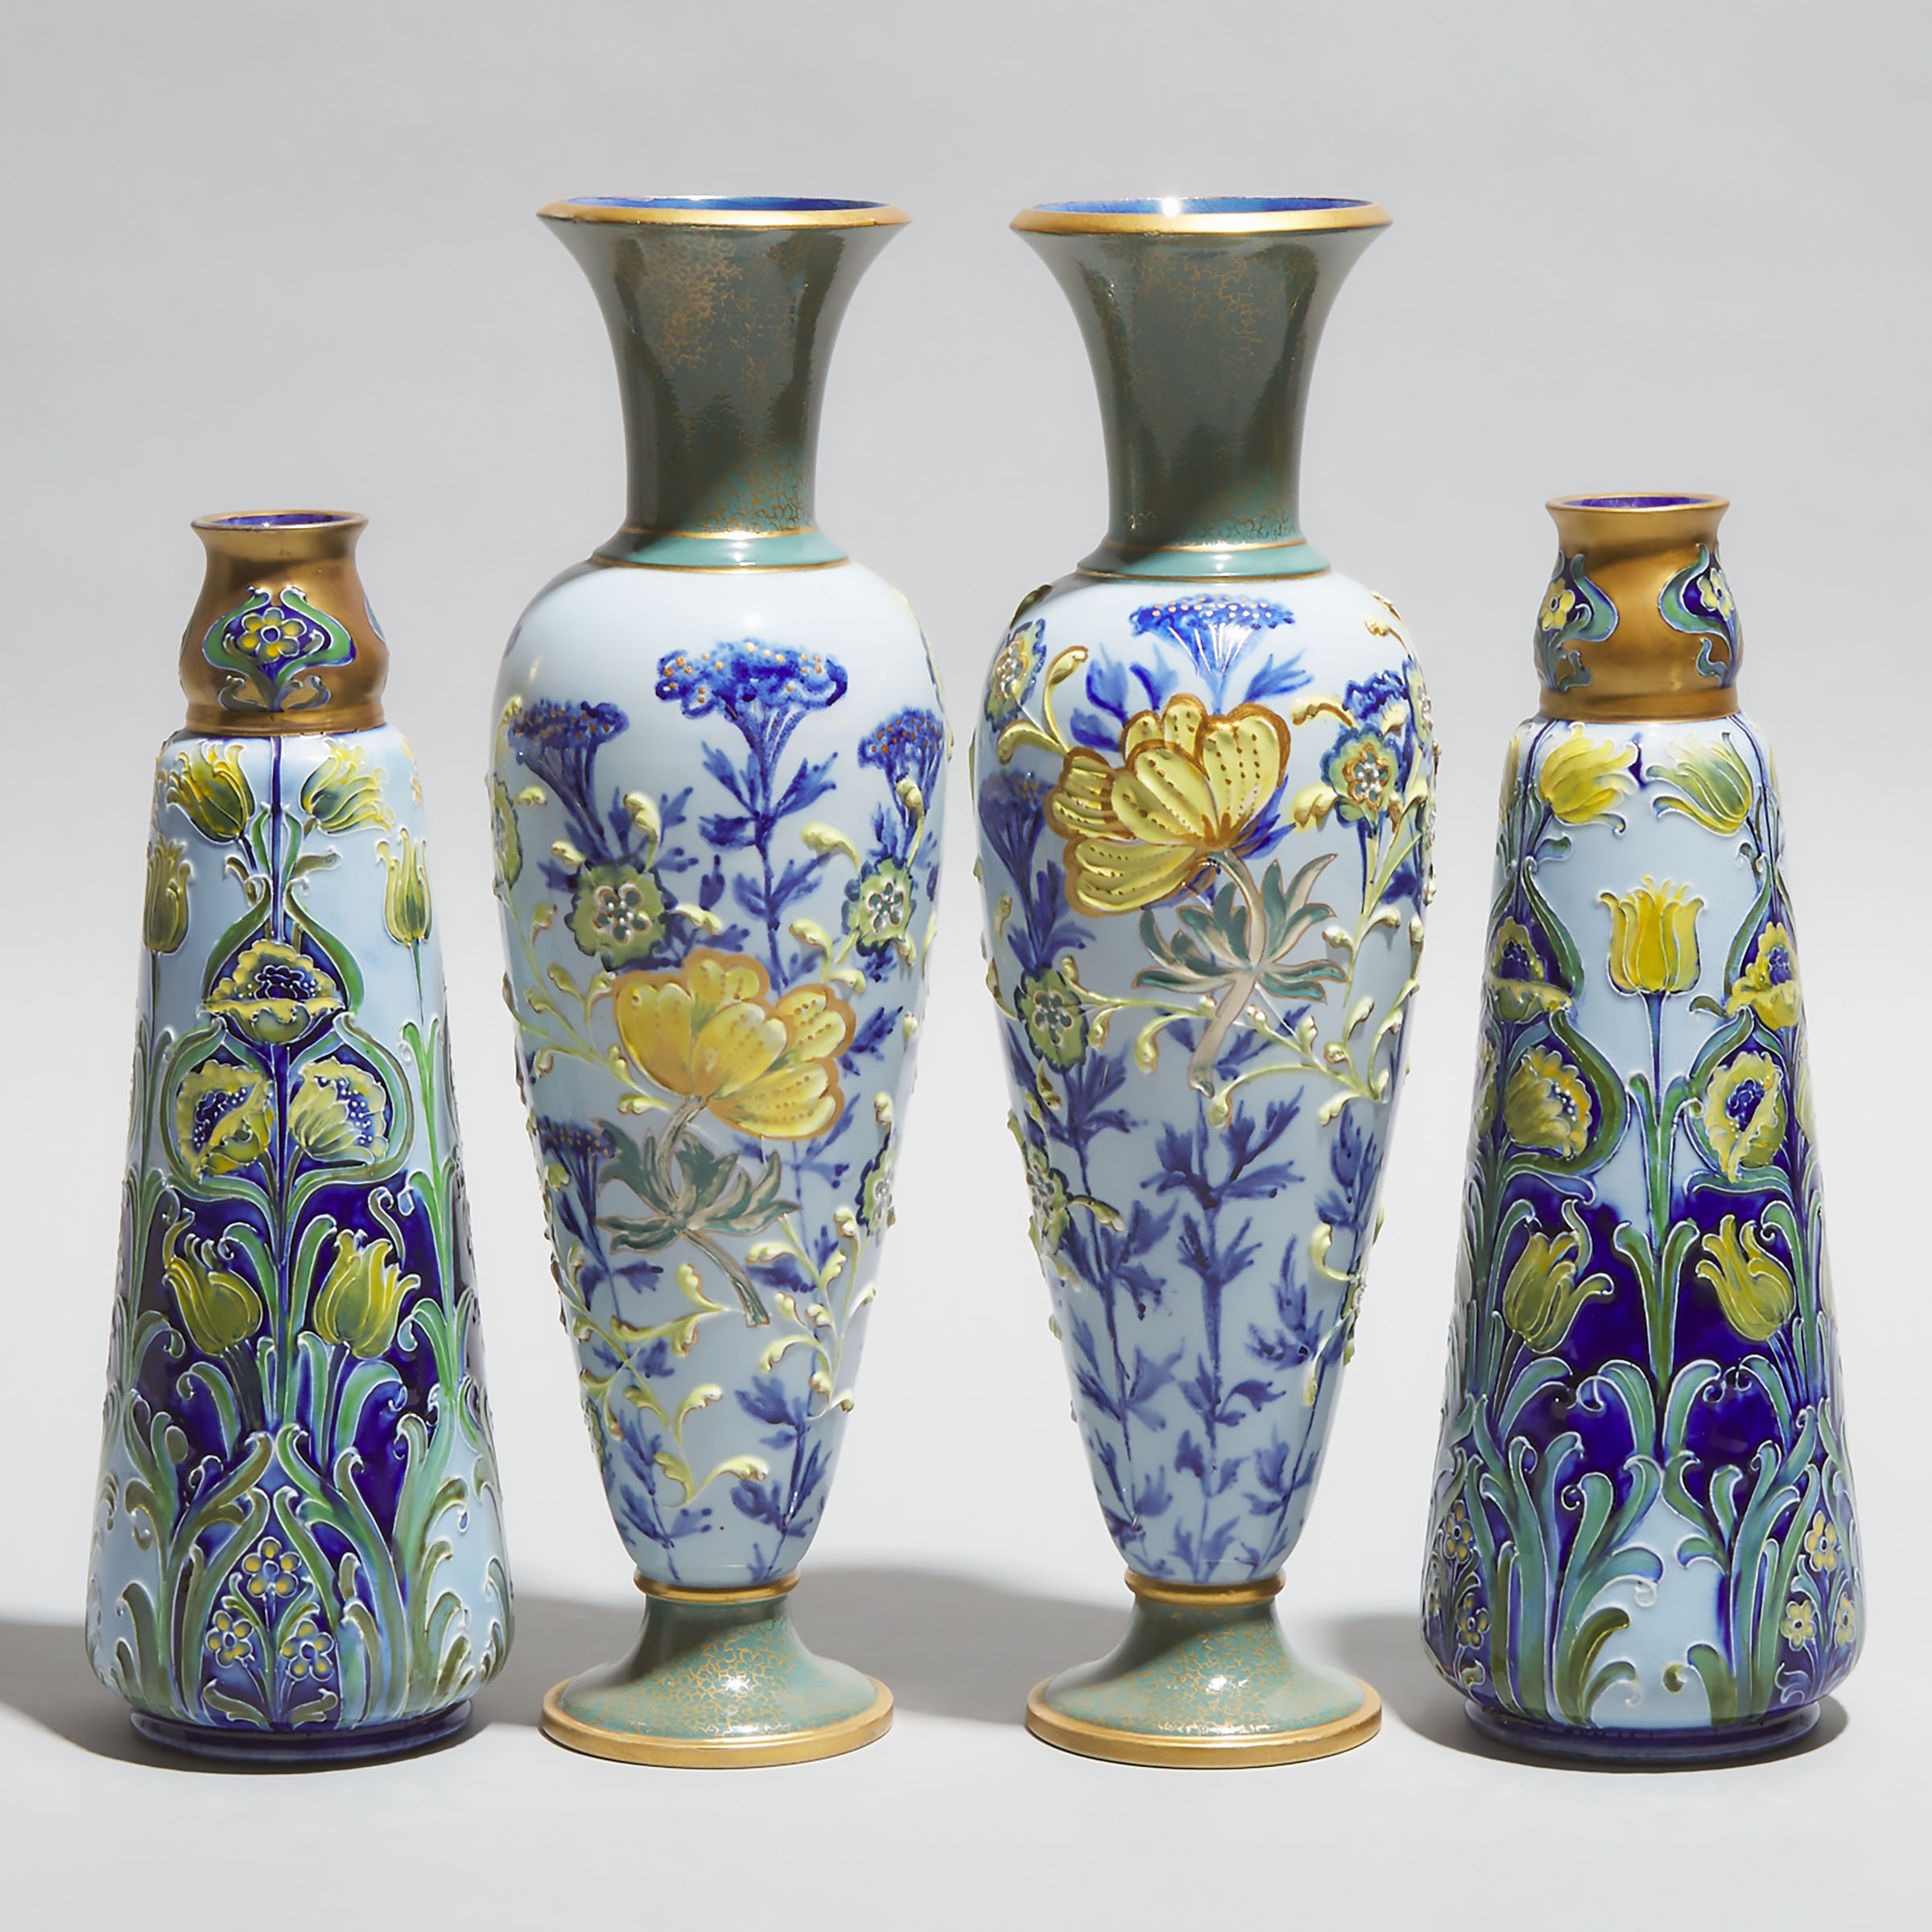 Pair of Macintyre Moorcroft Florian Vases and Another Pair, c.1900